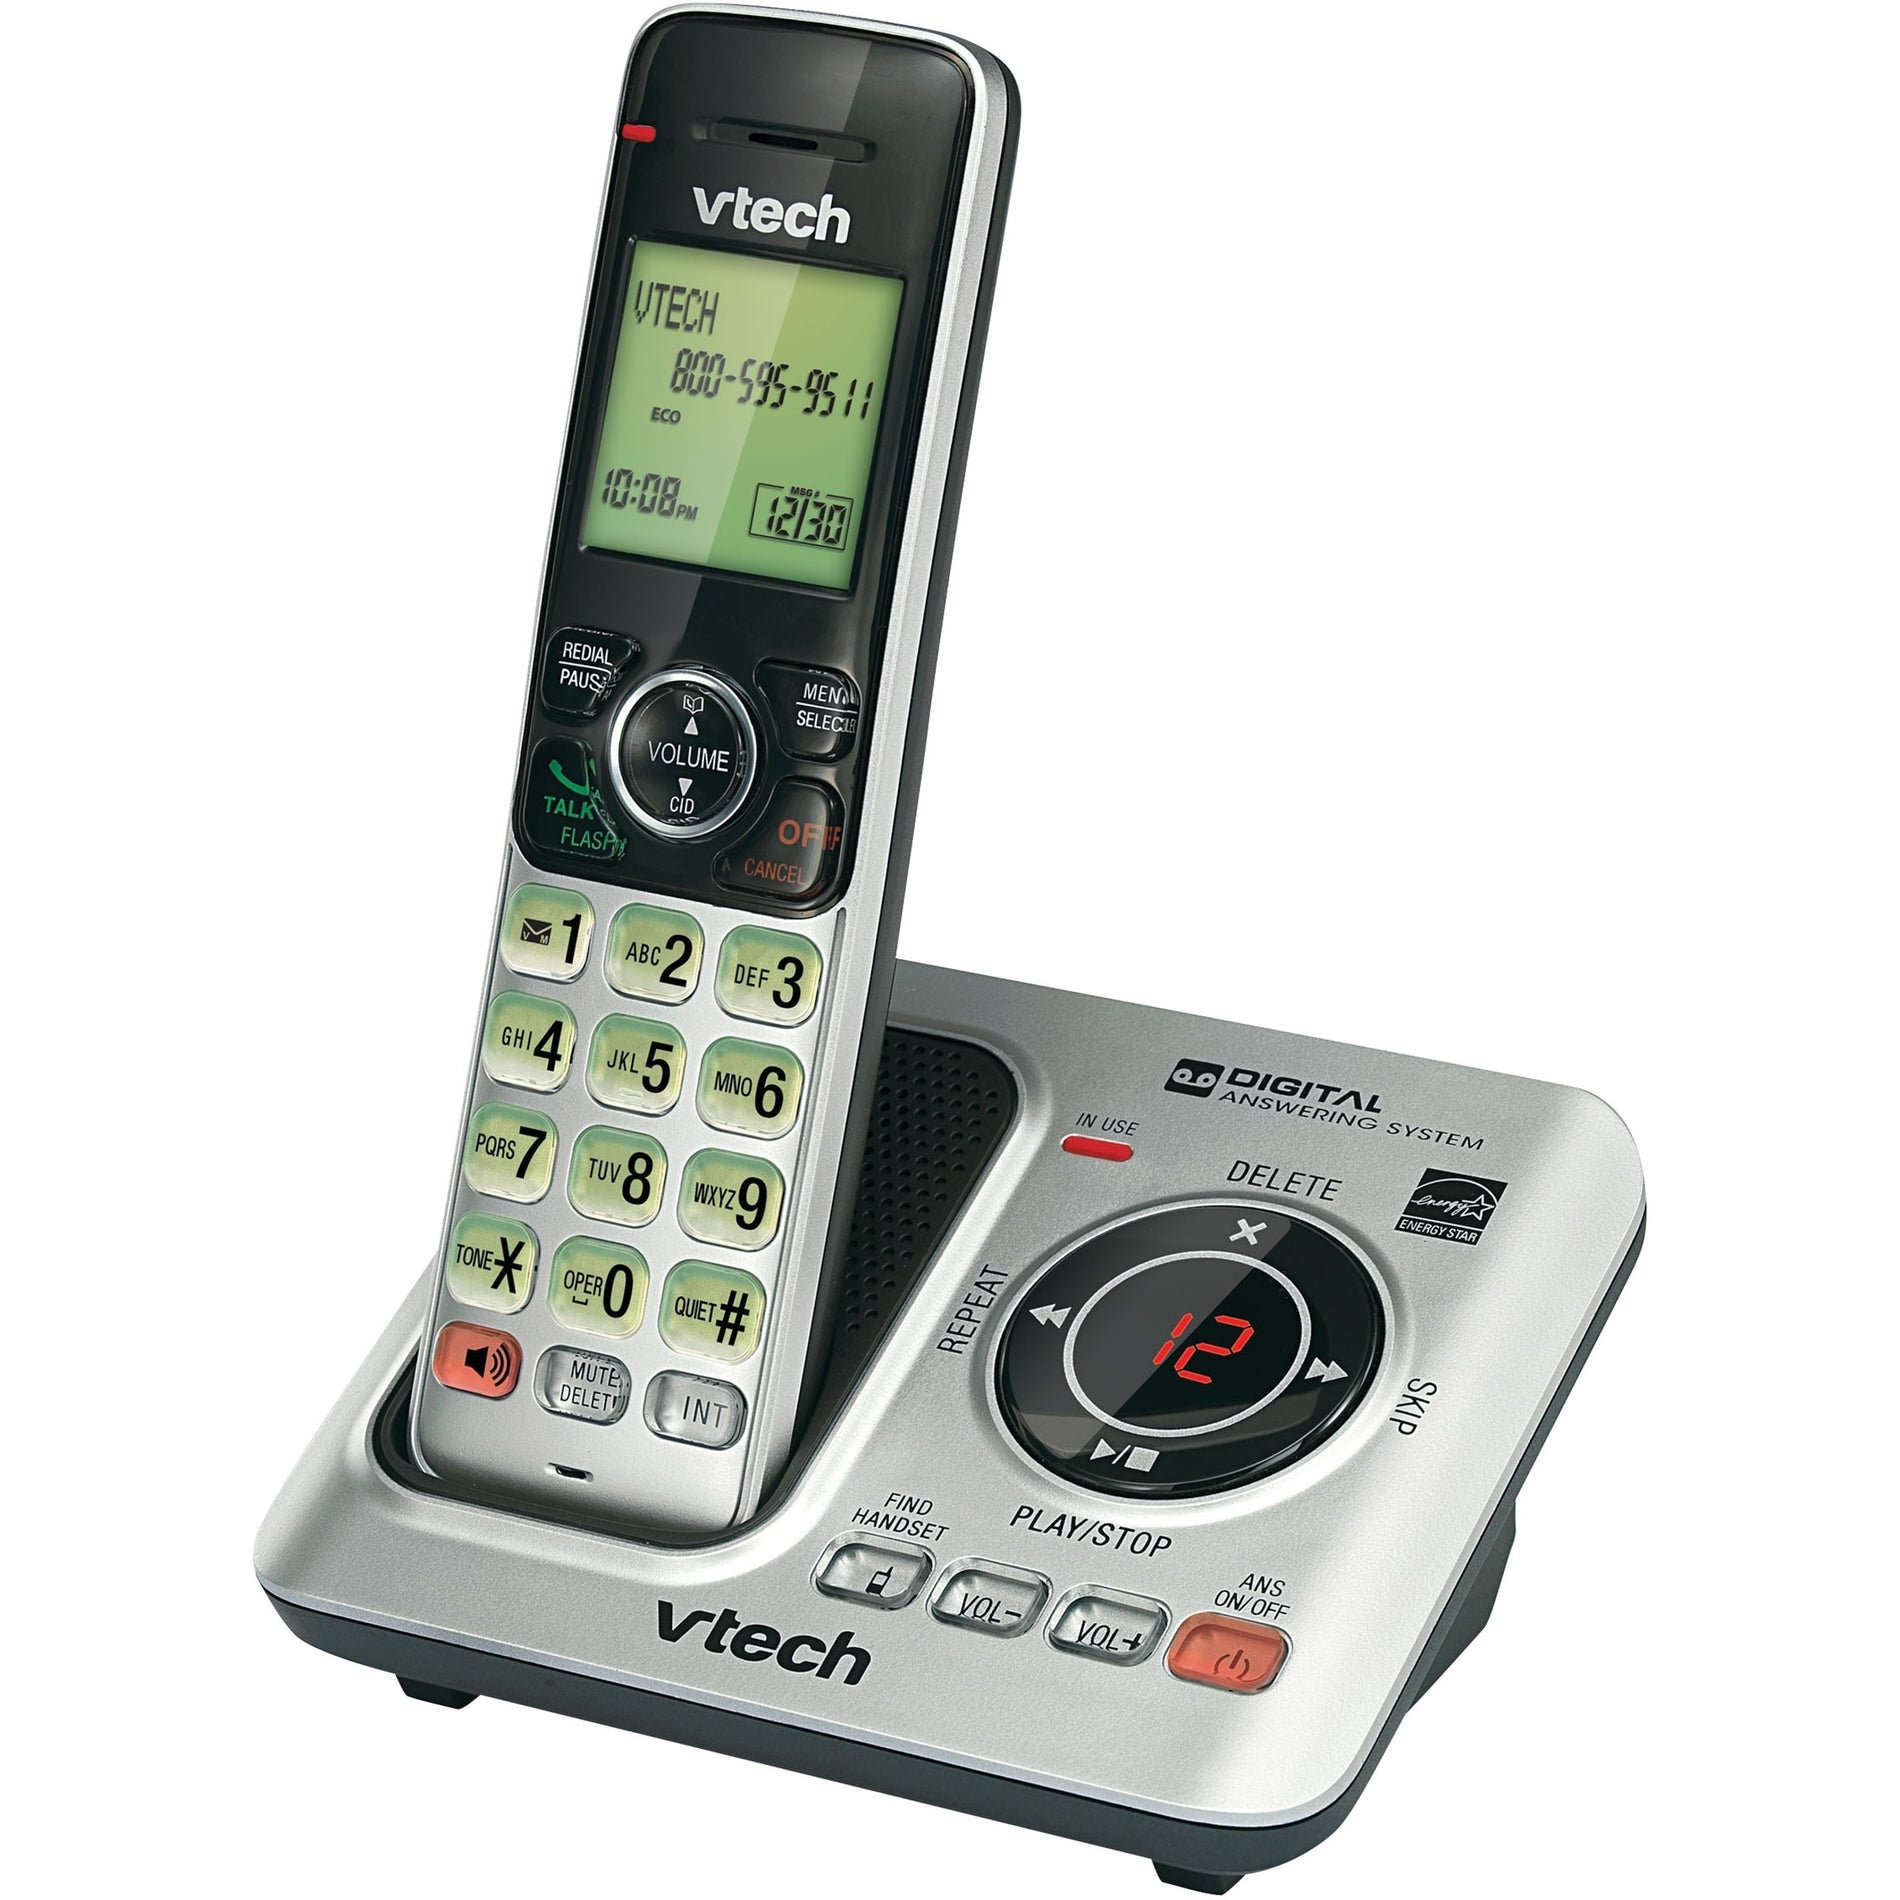 VTech CS6629 Cordless Answering System with Caller ID/Call Waiting, Expandable, Volume Control, Eco Mode